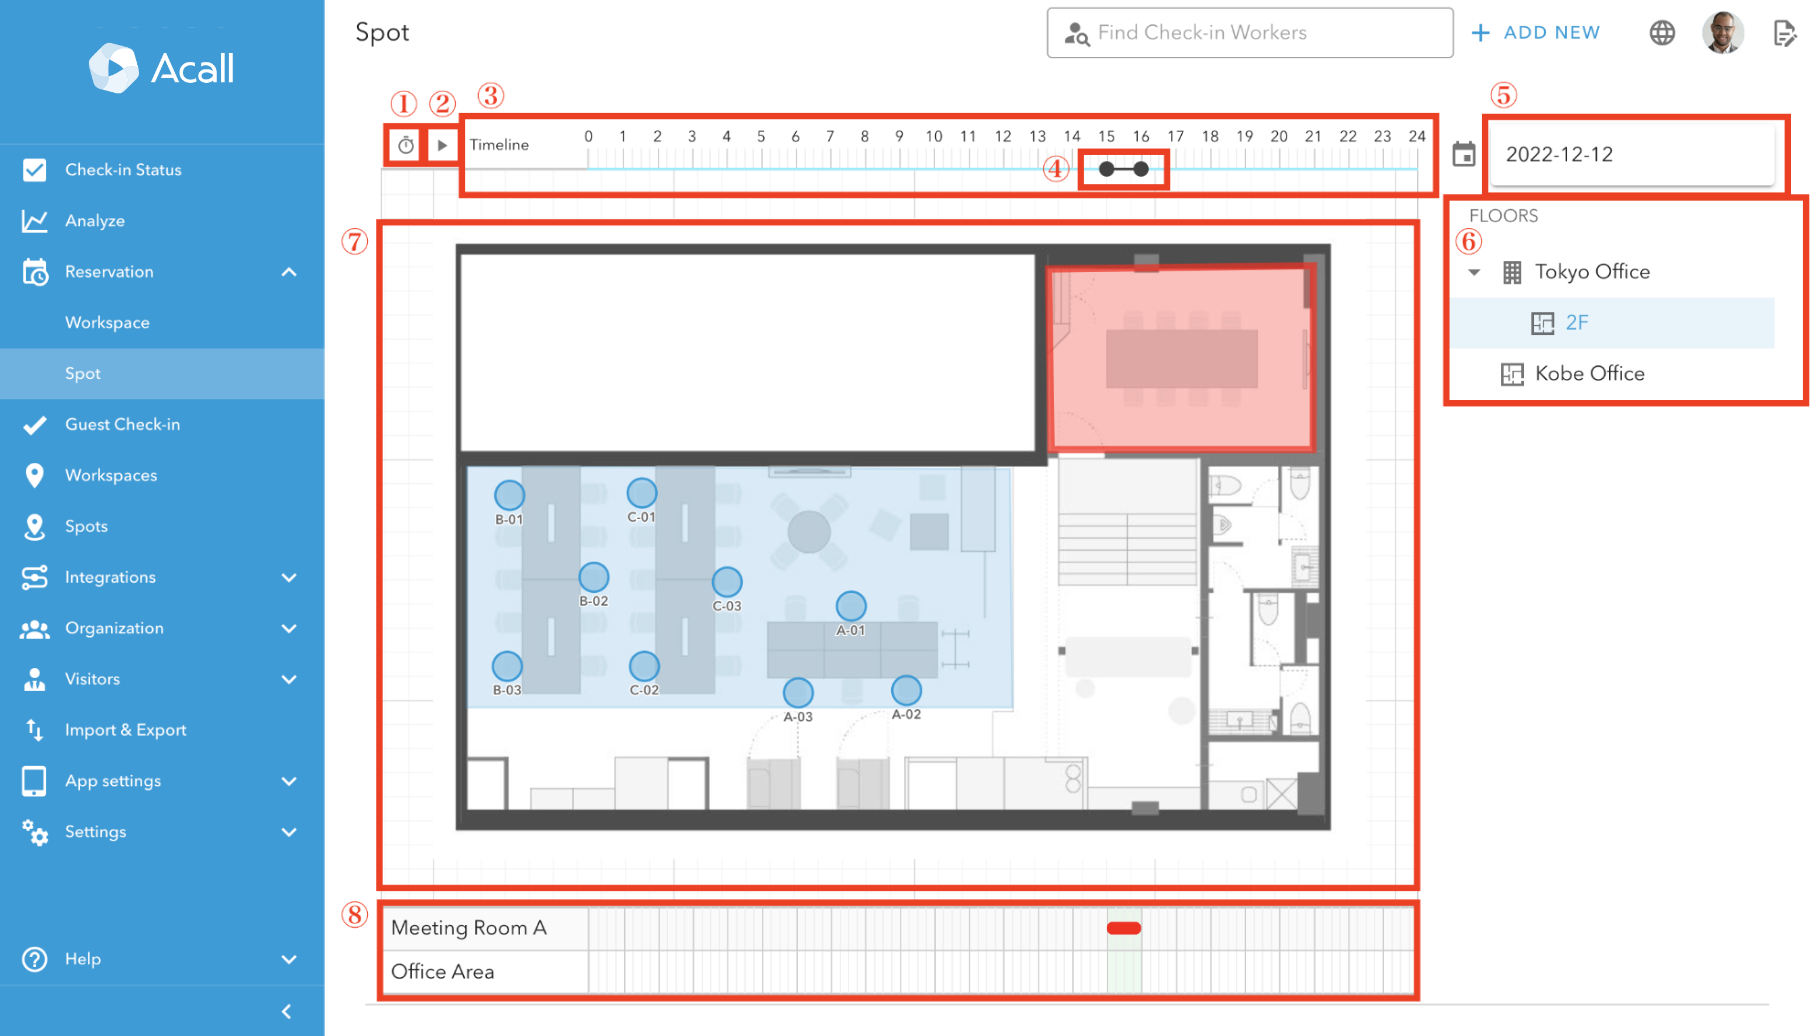 Reserve Your Spot on Floor Map on Acall Portal2.png